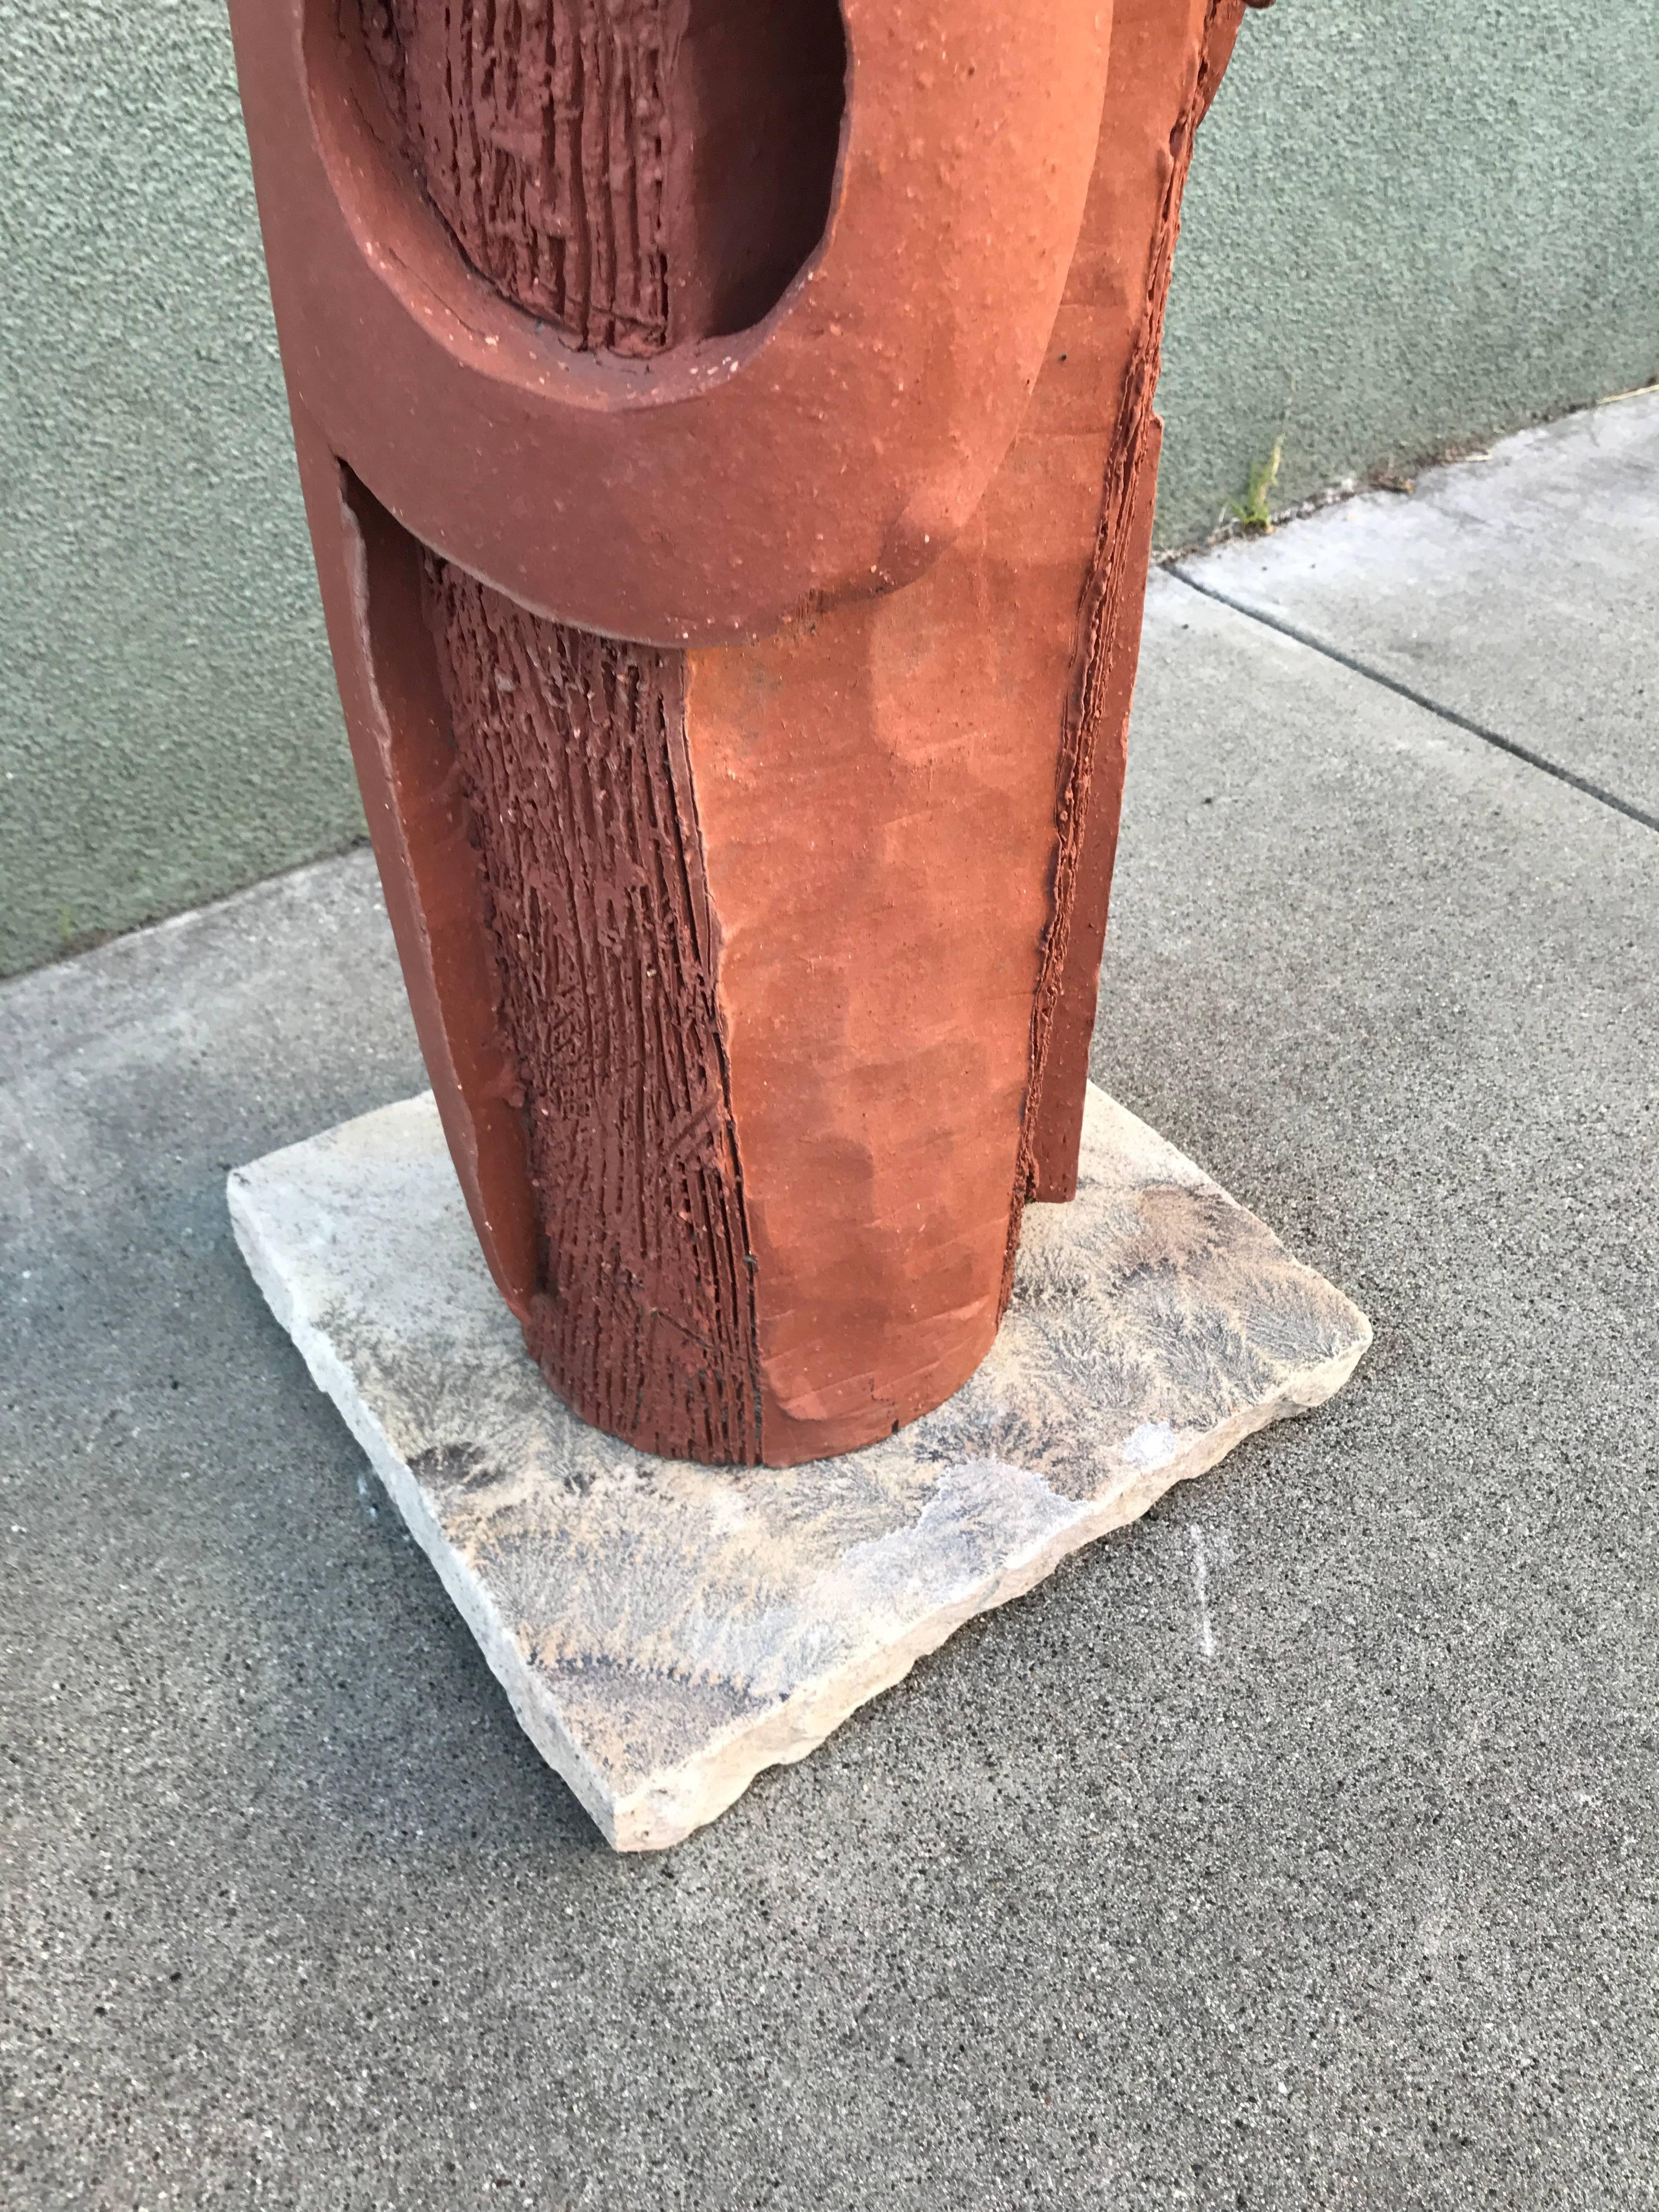 Large 1970s, Bay Area Ceramic Abstract or Bruttalist Sculpture TOTEM #1 1